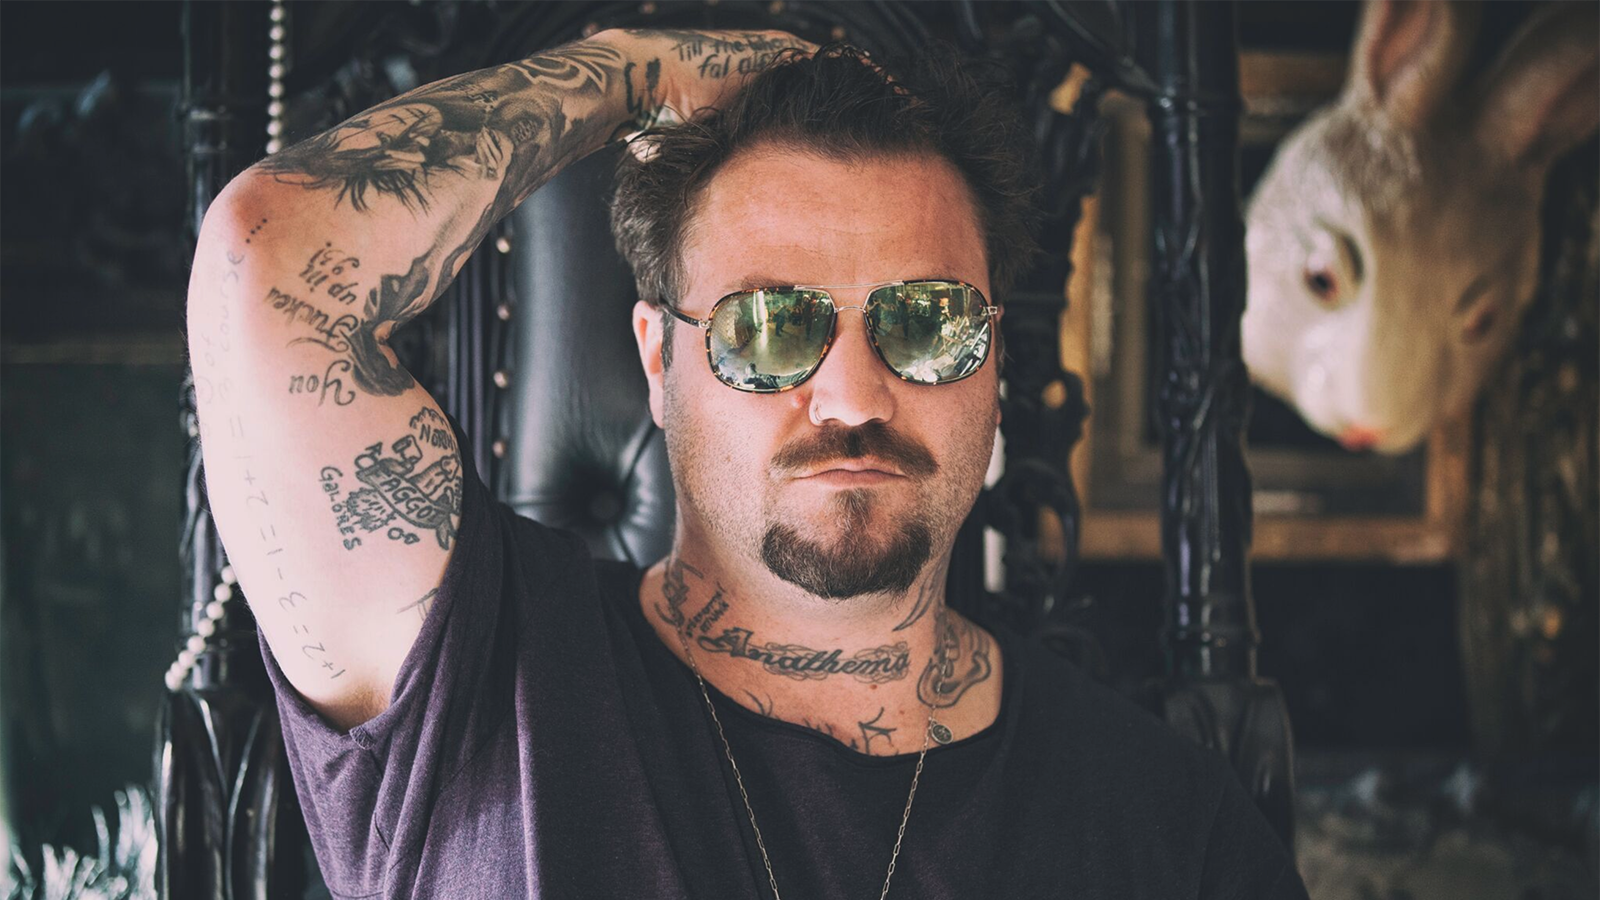 Bam Margera Leaves Rehab: "I Realized When I Am Bored Is When I Drink" |  Revolver